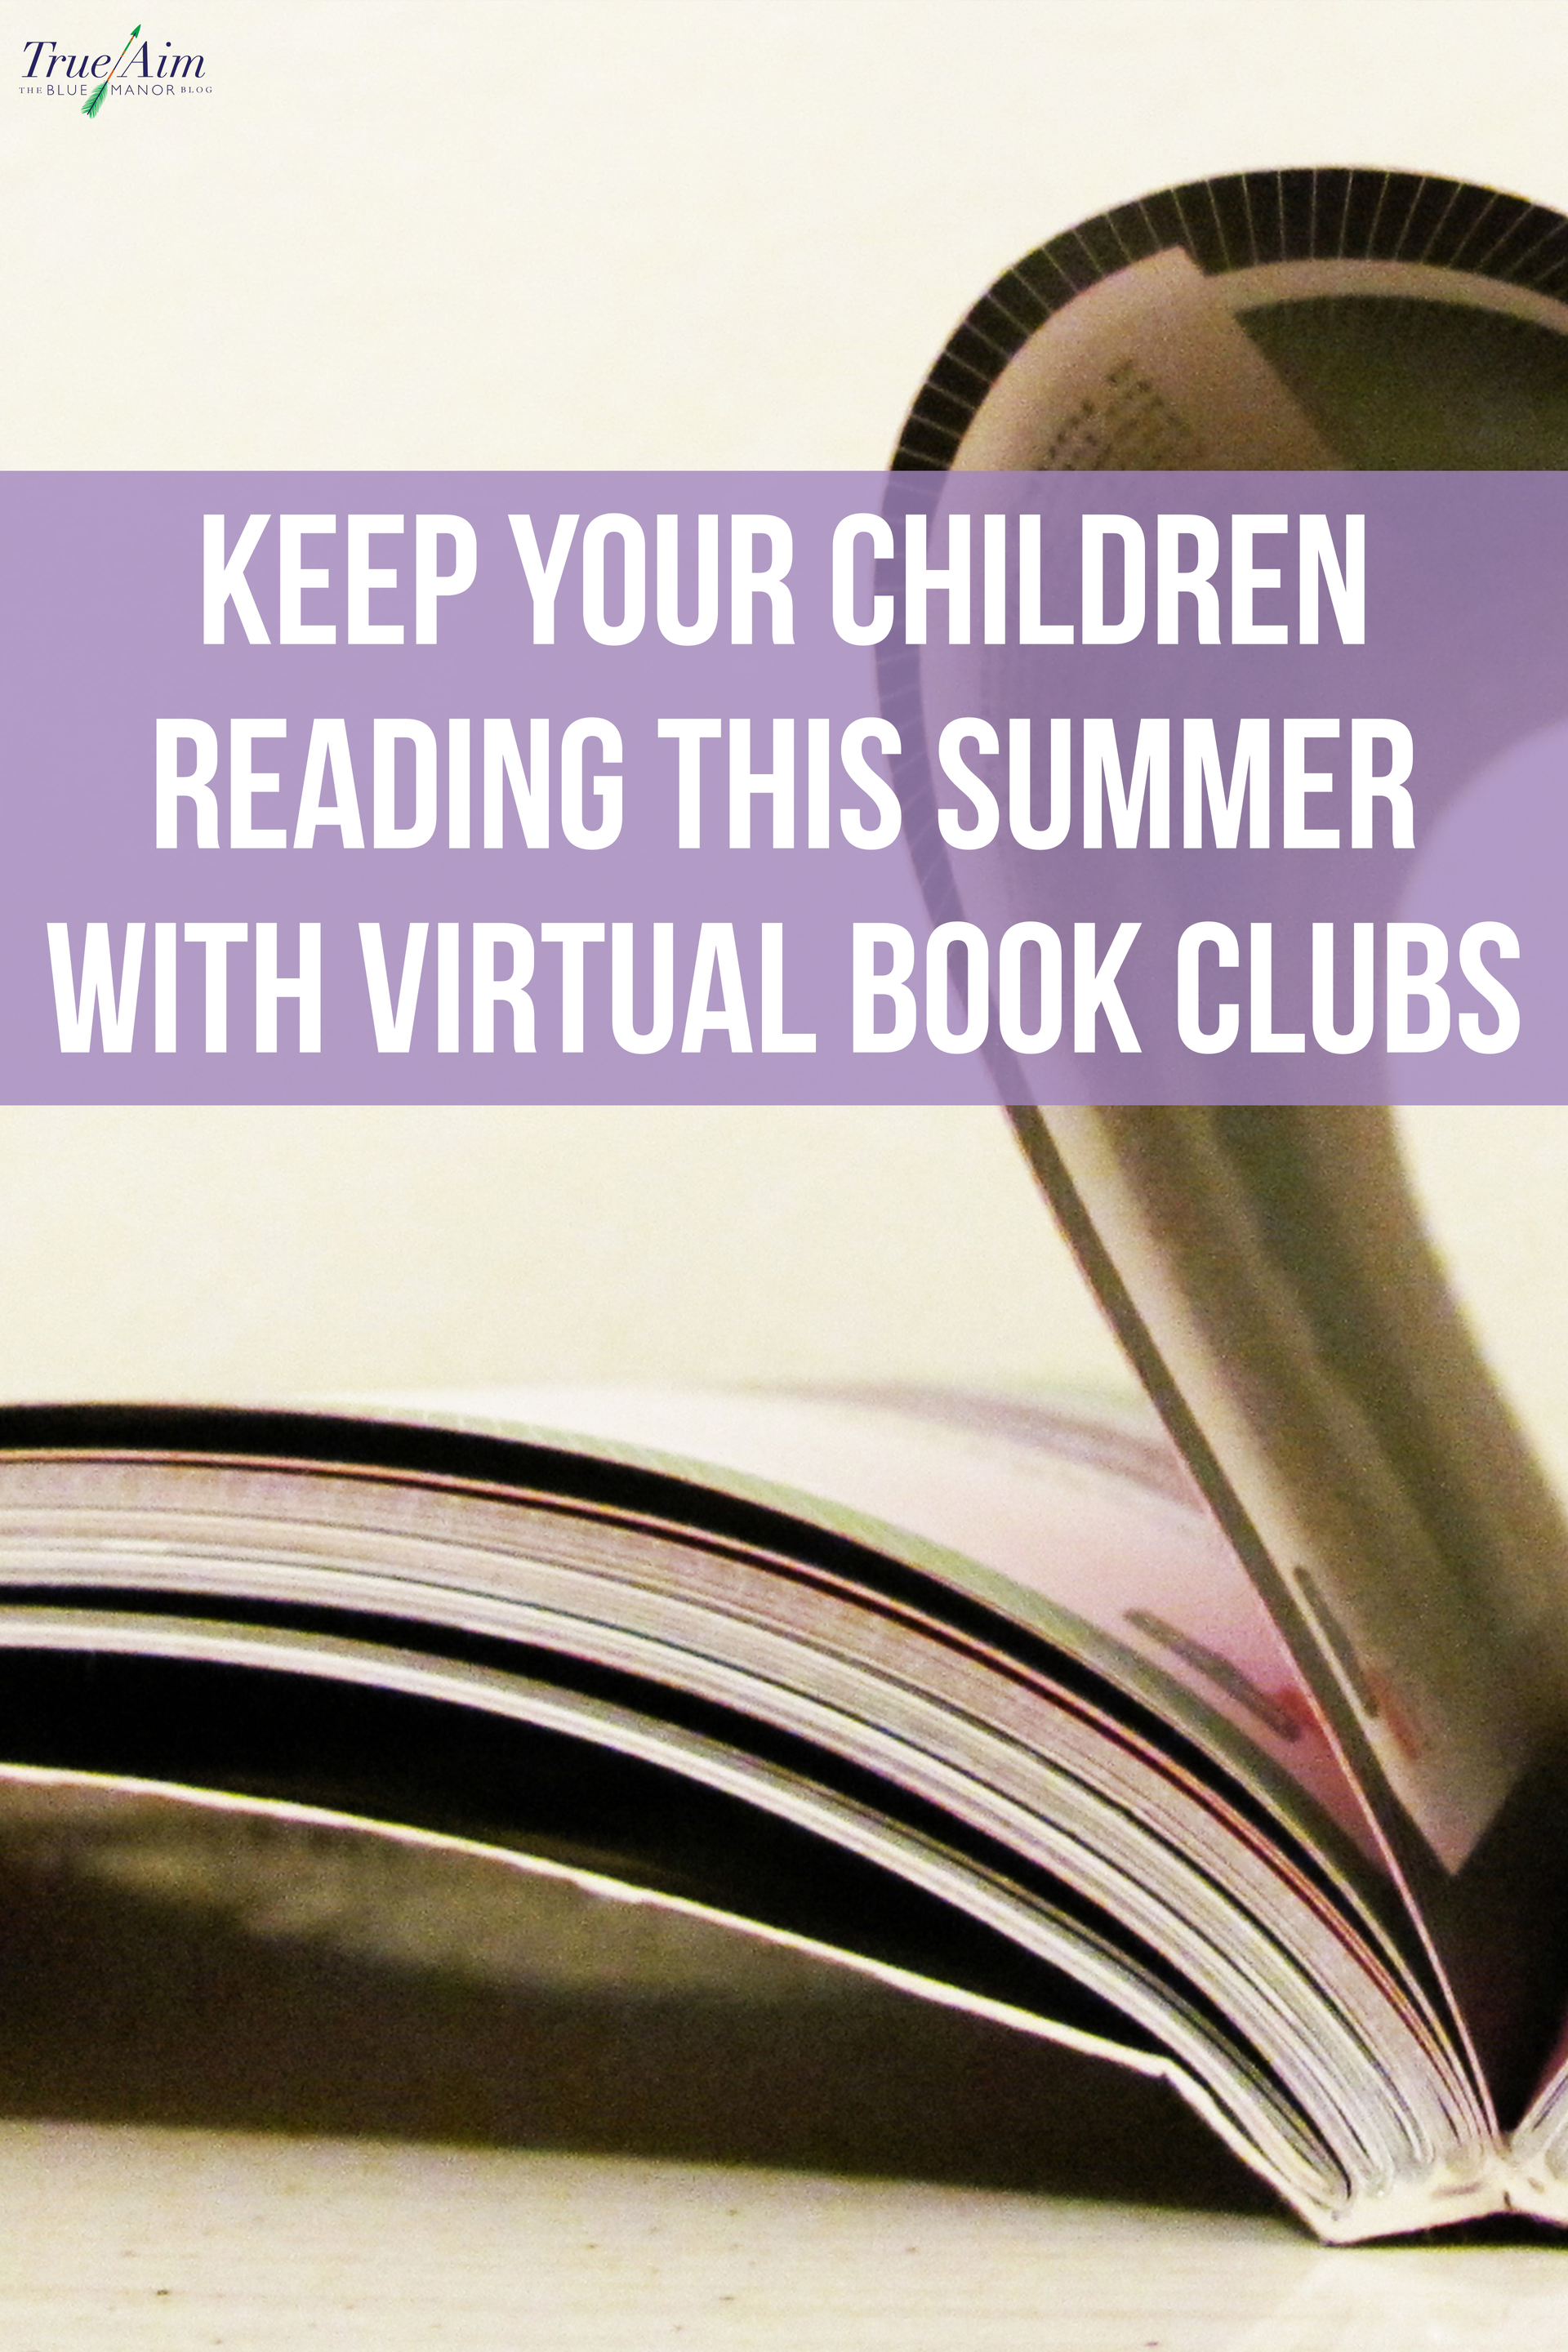 Keep Your Children Reading This Summer With Virtual Book Clubs